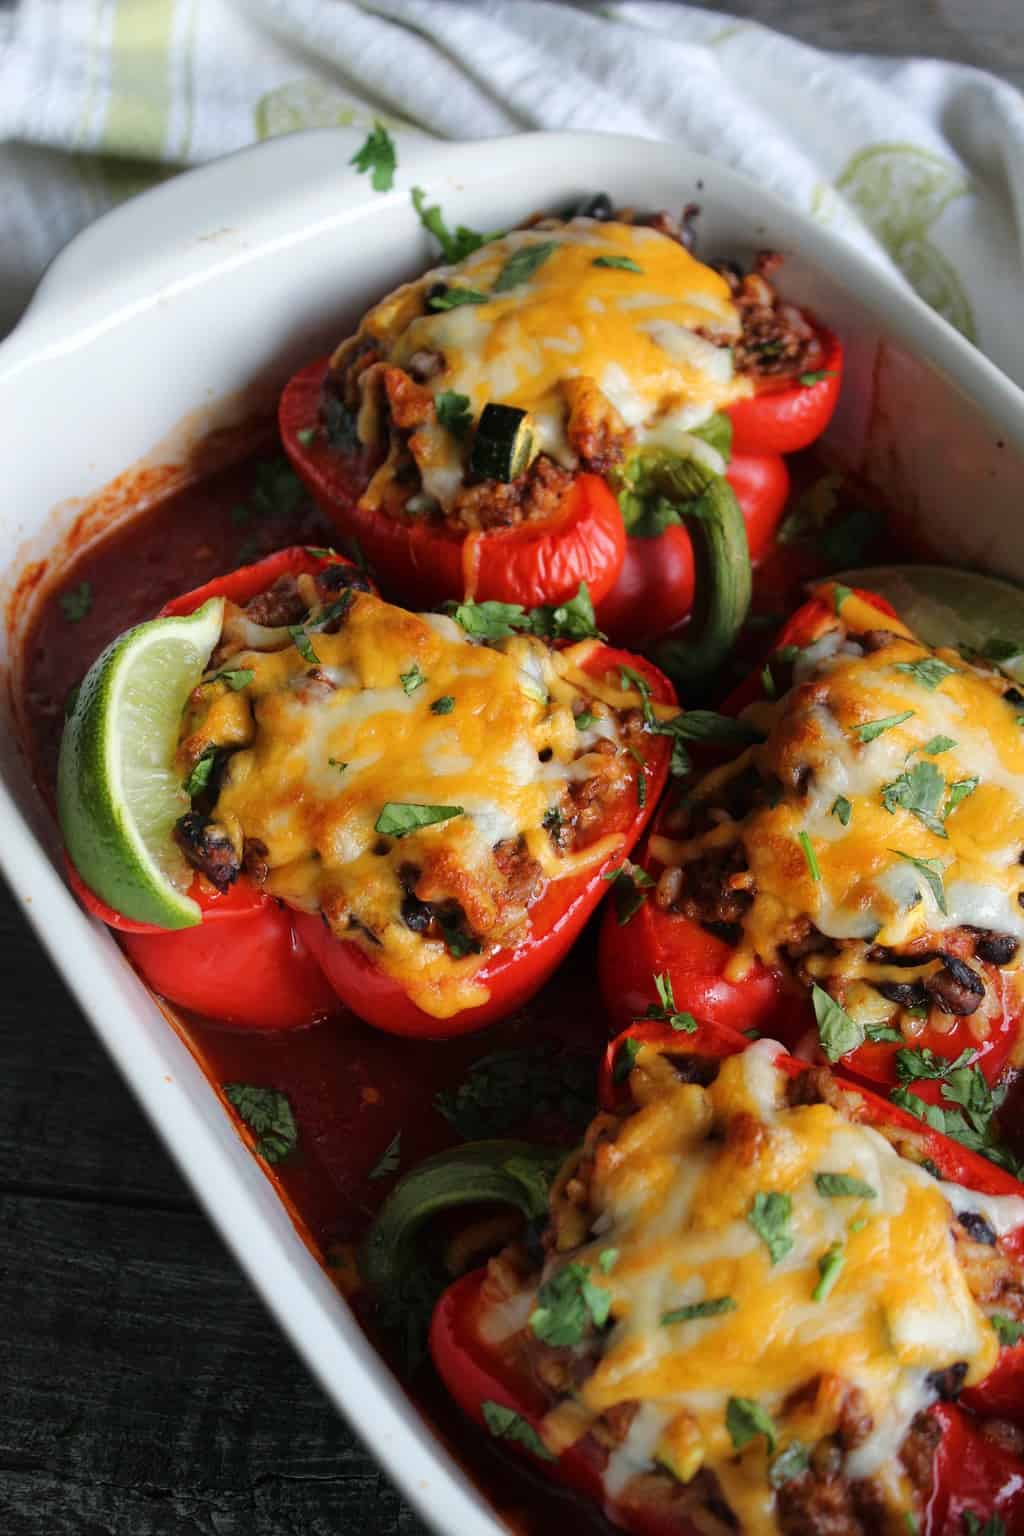 White casserole dish with stuffed red bell peppers in enchilada sauce topped with melted cheese